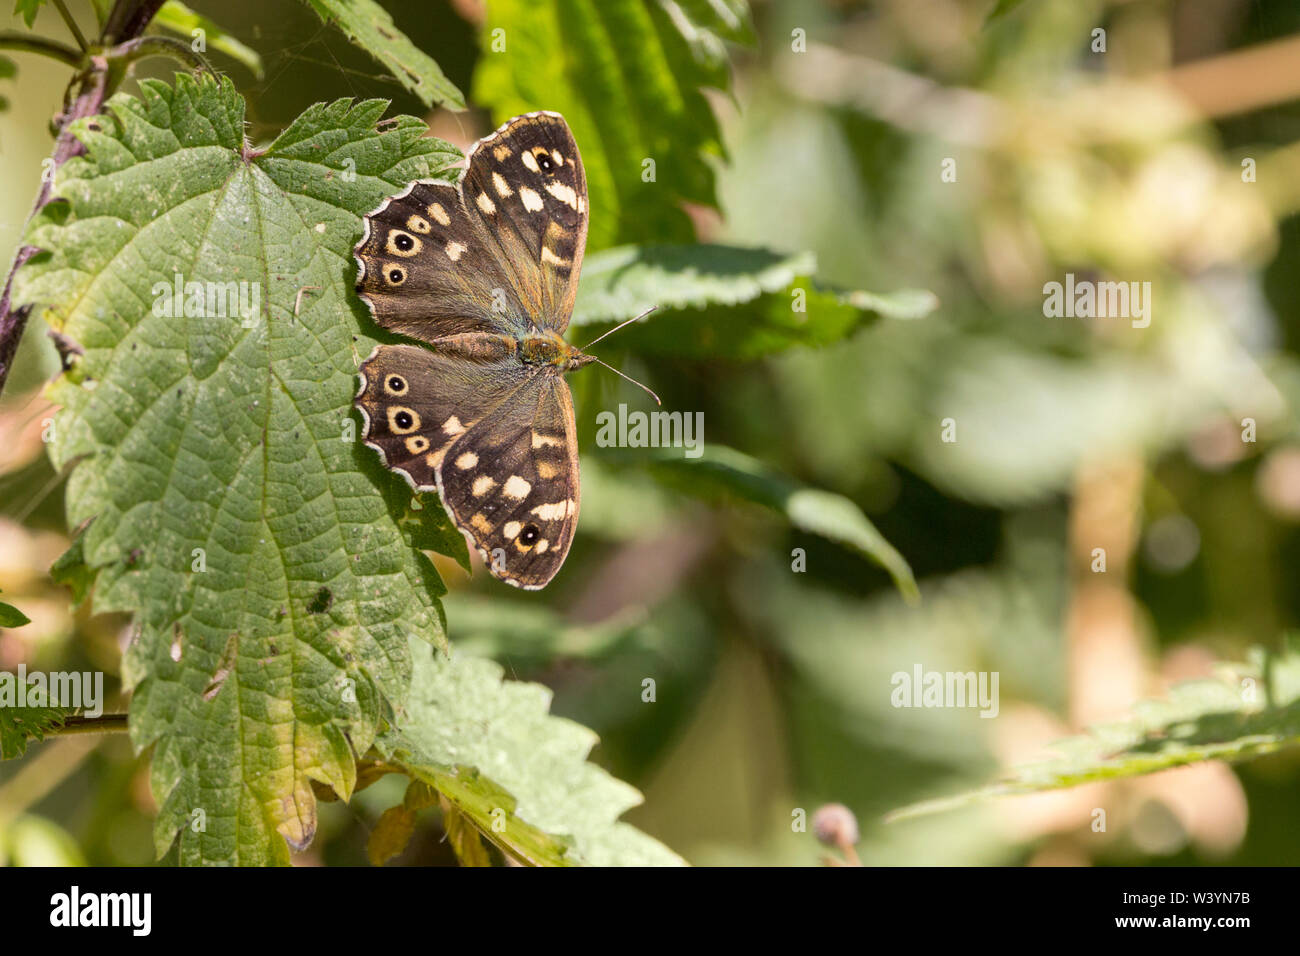 Speckled wood butterfly (Pararge aegeria) dark brown with buff patches, and false eye markings one on forewings three on hindwings with white centres Stock Photo